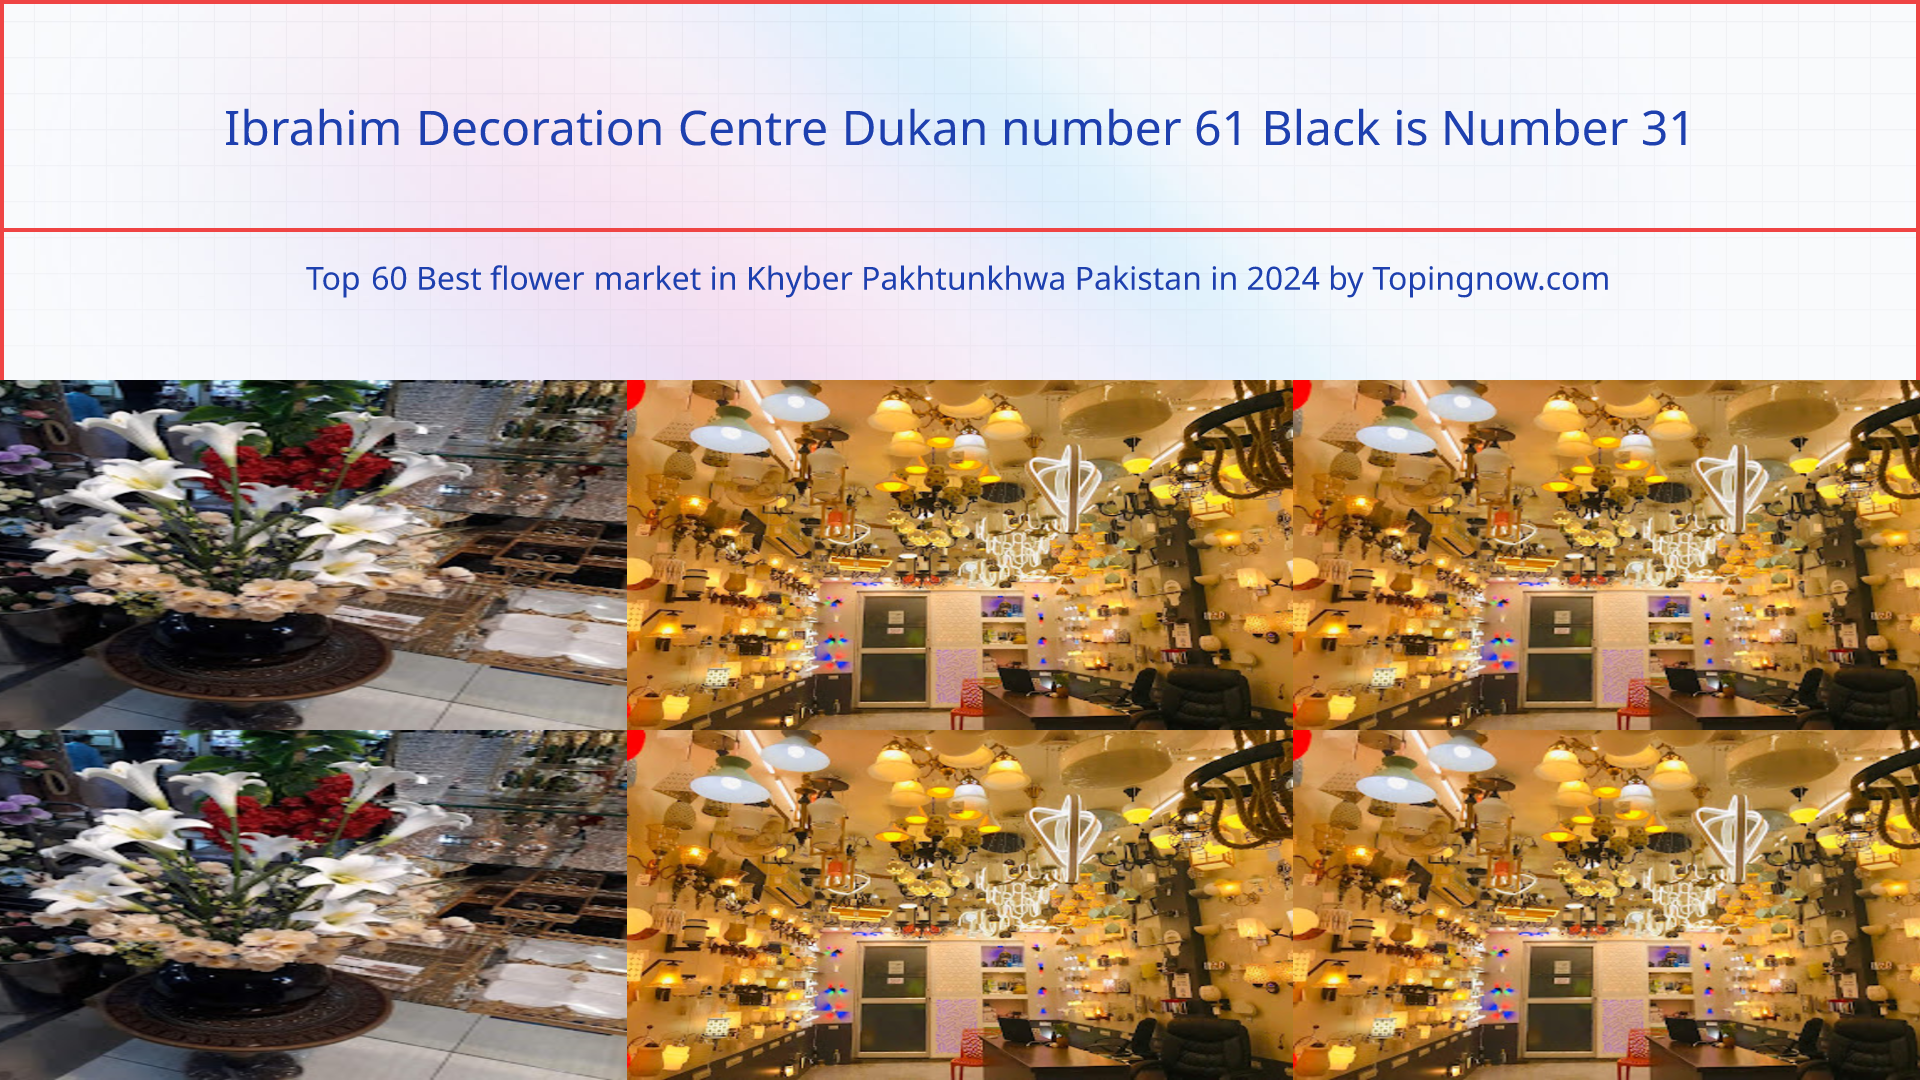 Ibrahim Decoration Centre Dukan number 61 Black: Top 60 Best flower market in Khyber Pakhtunkhwa Pakistan in 2024